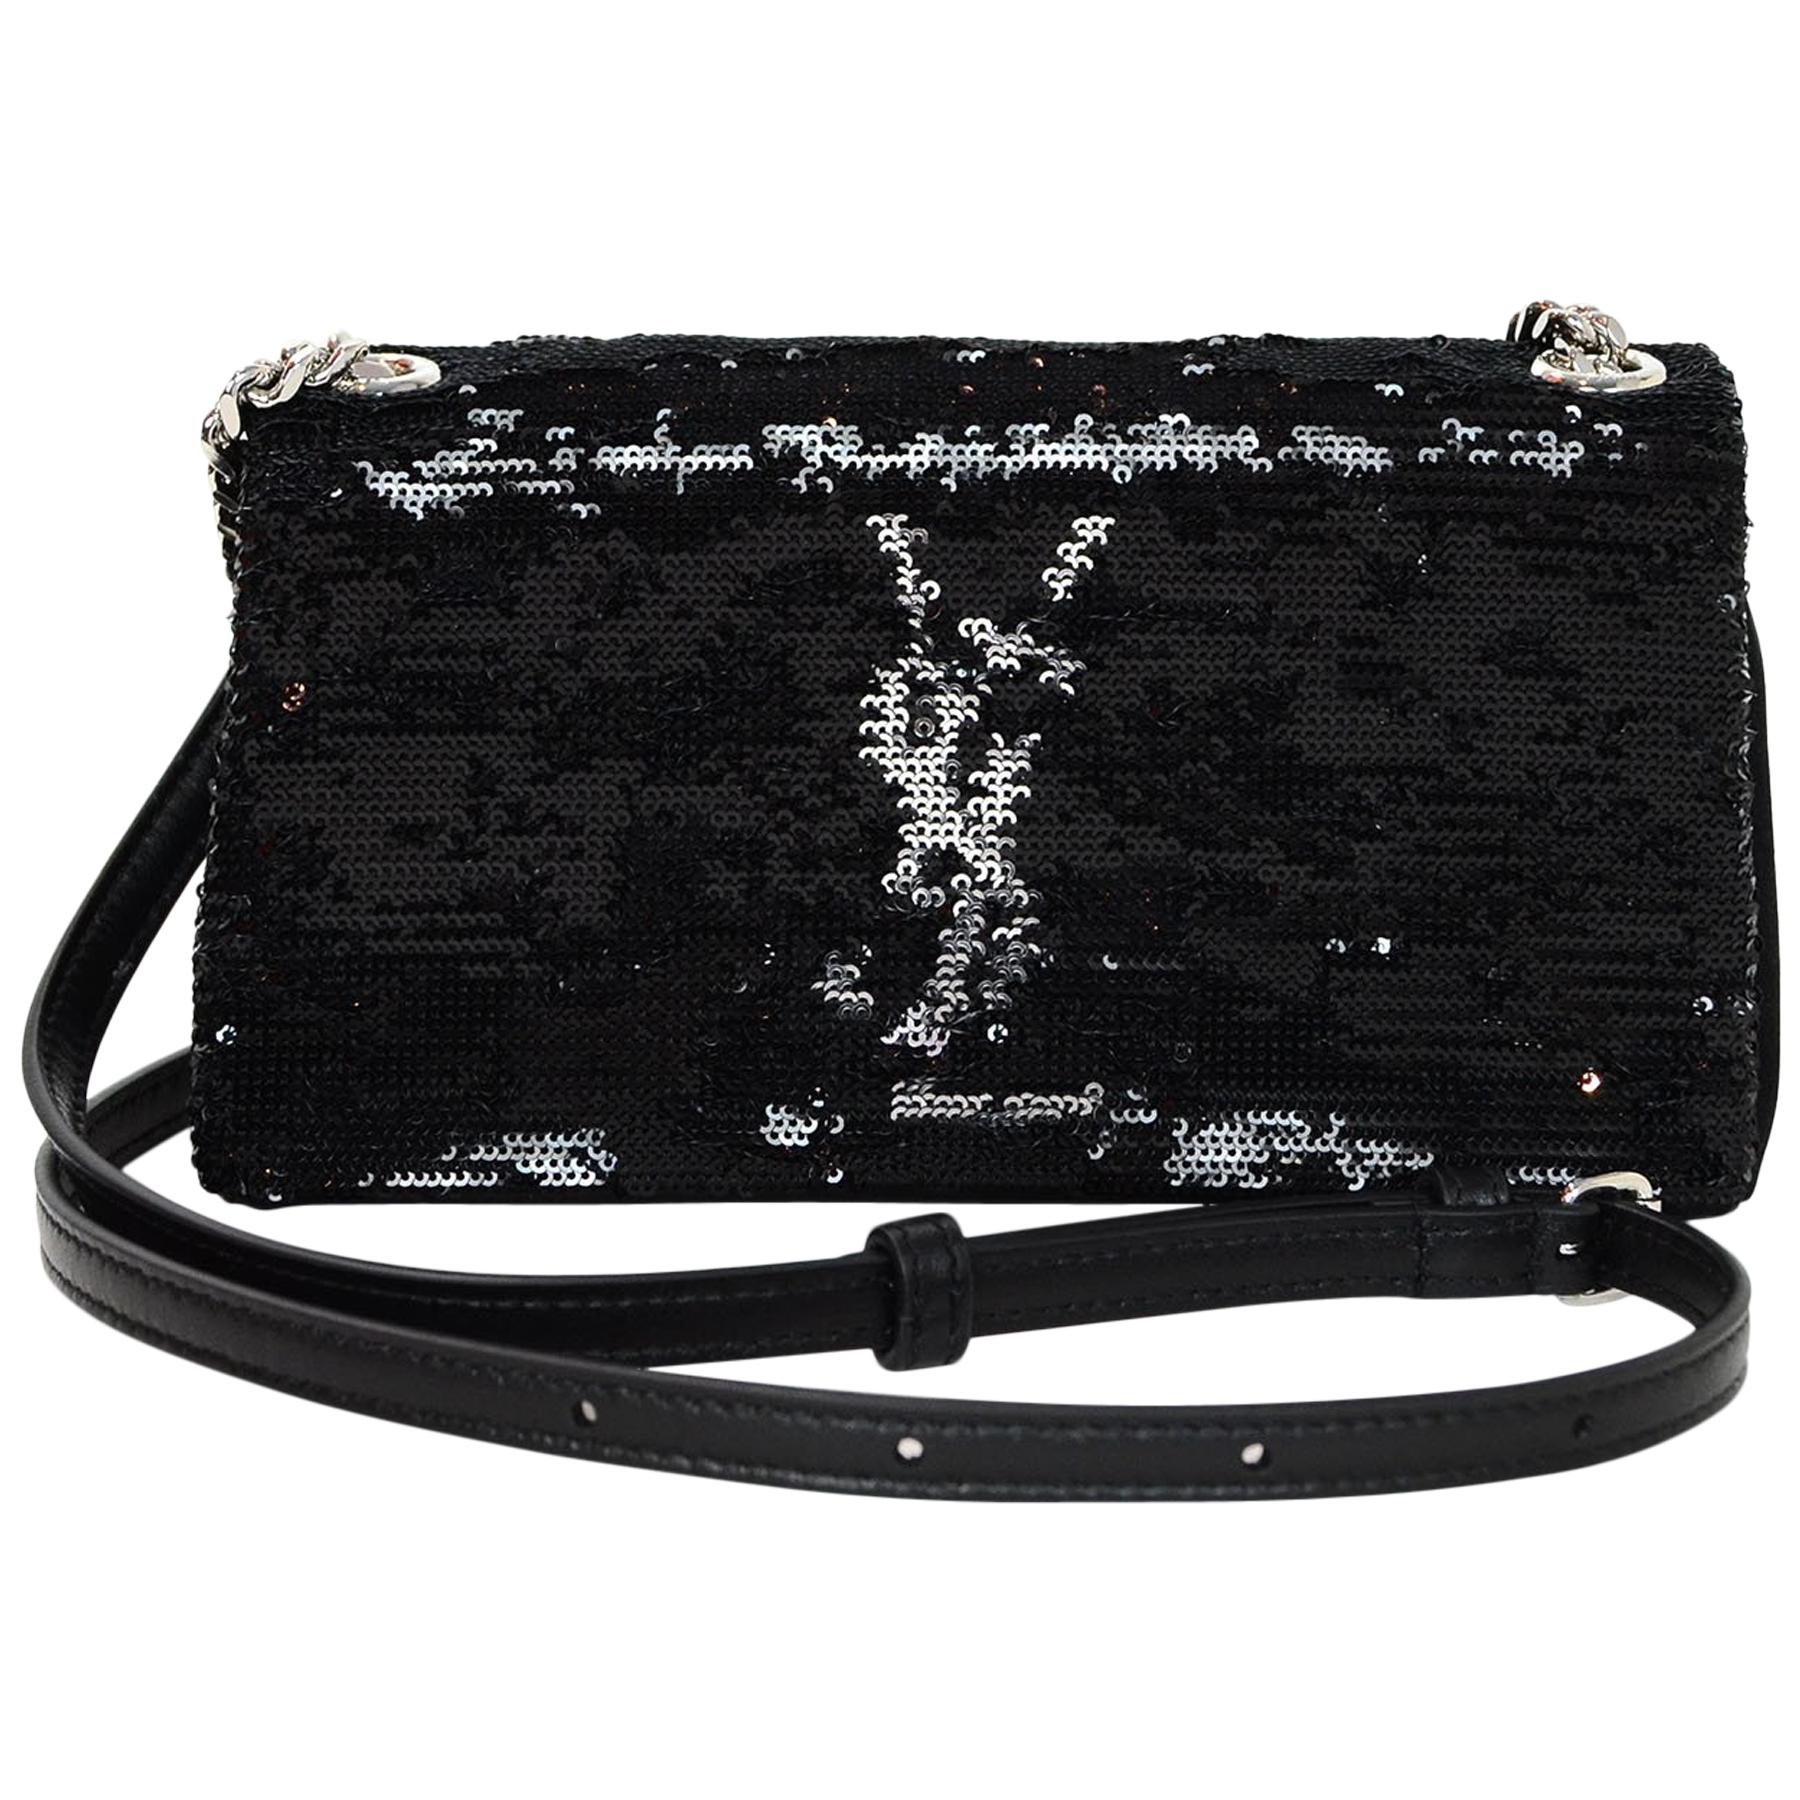 Saint Laurent Black/Silver Sequin Toy West Hollywood Crossbody Bag with DB